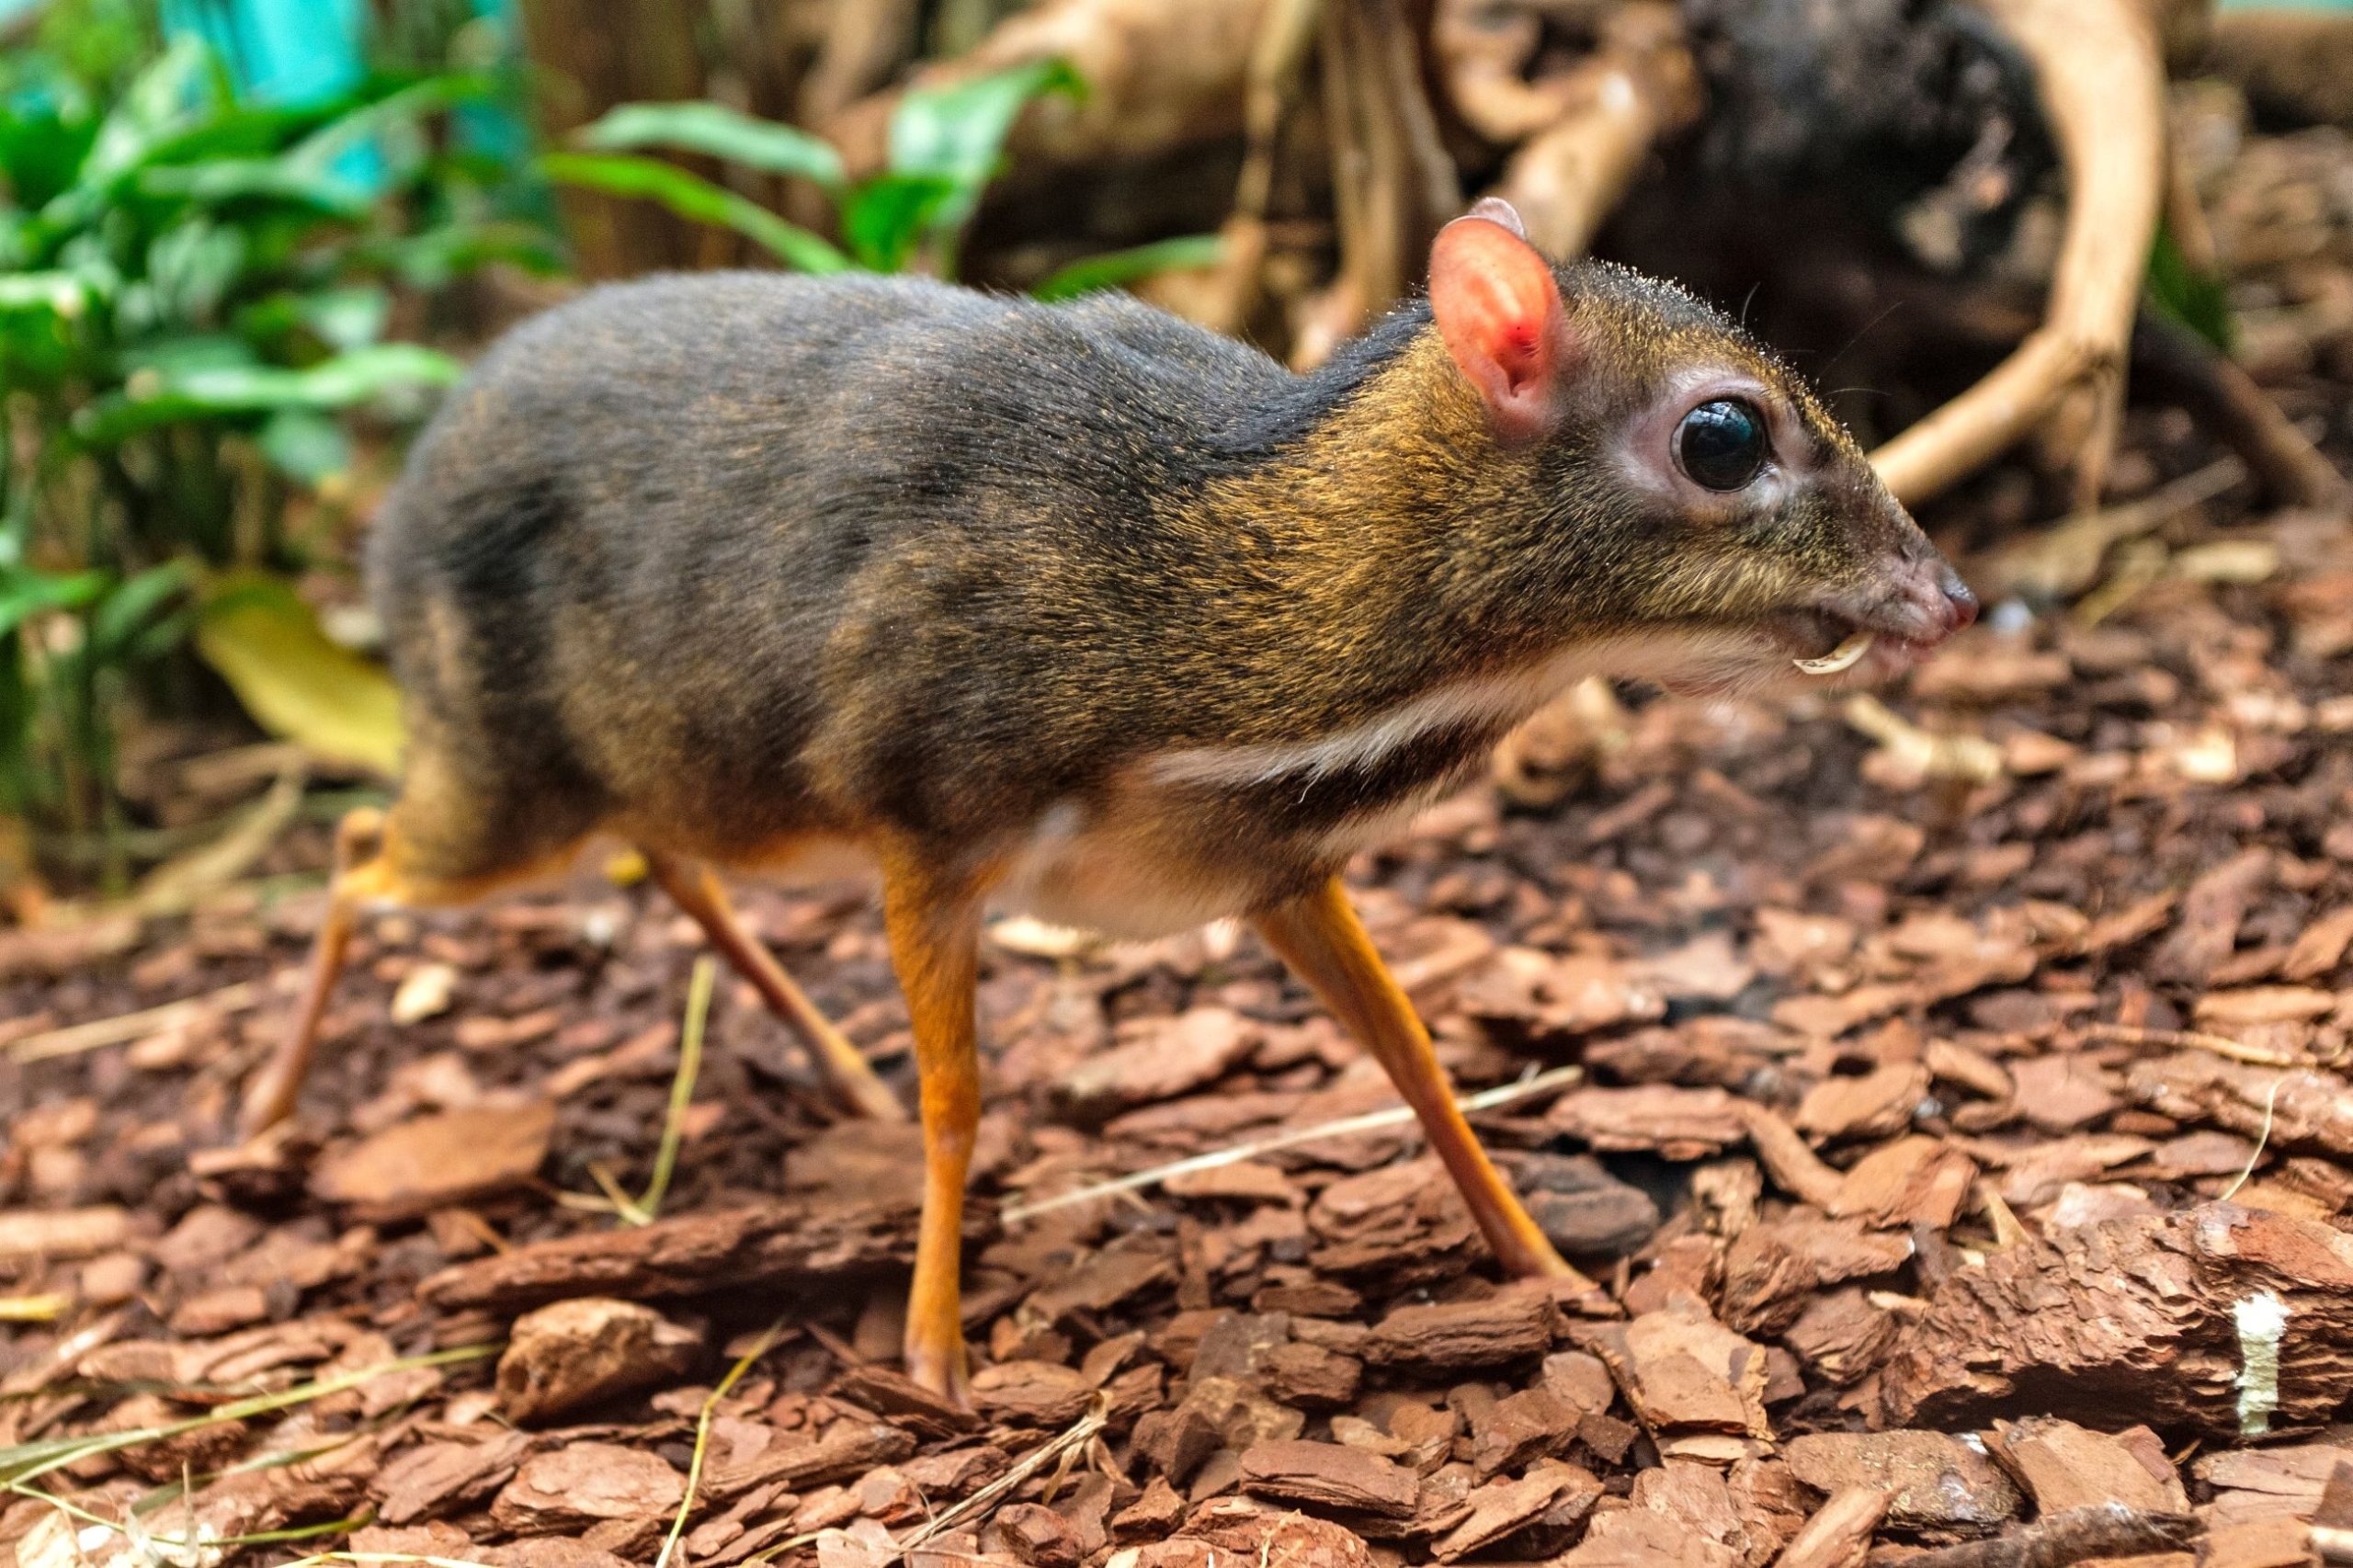 The birth of a mouse deer in the Wrocław zoo.  This is the first such recording in the world